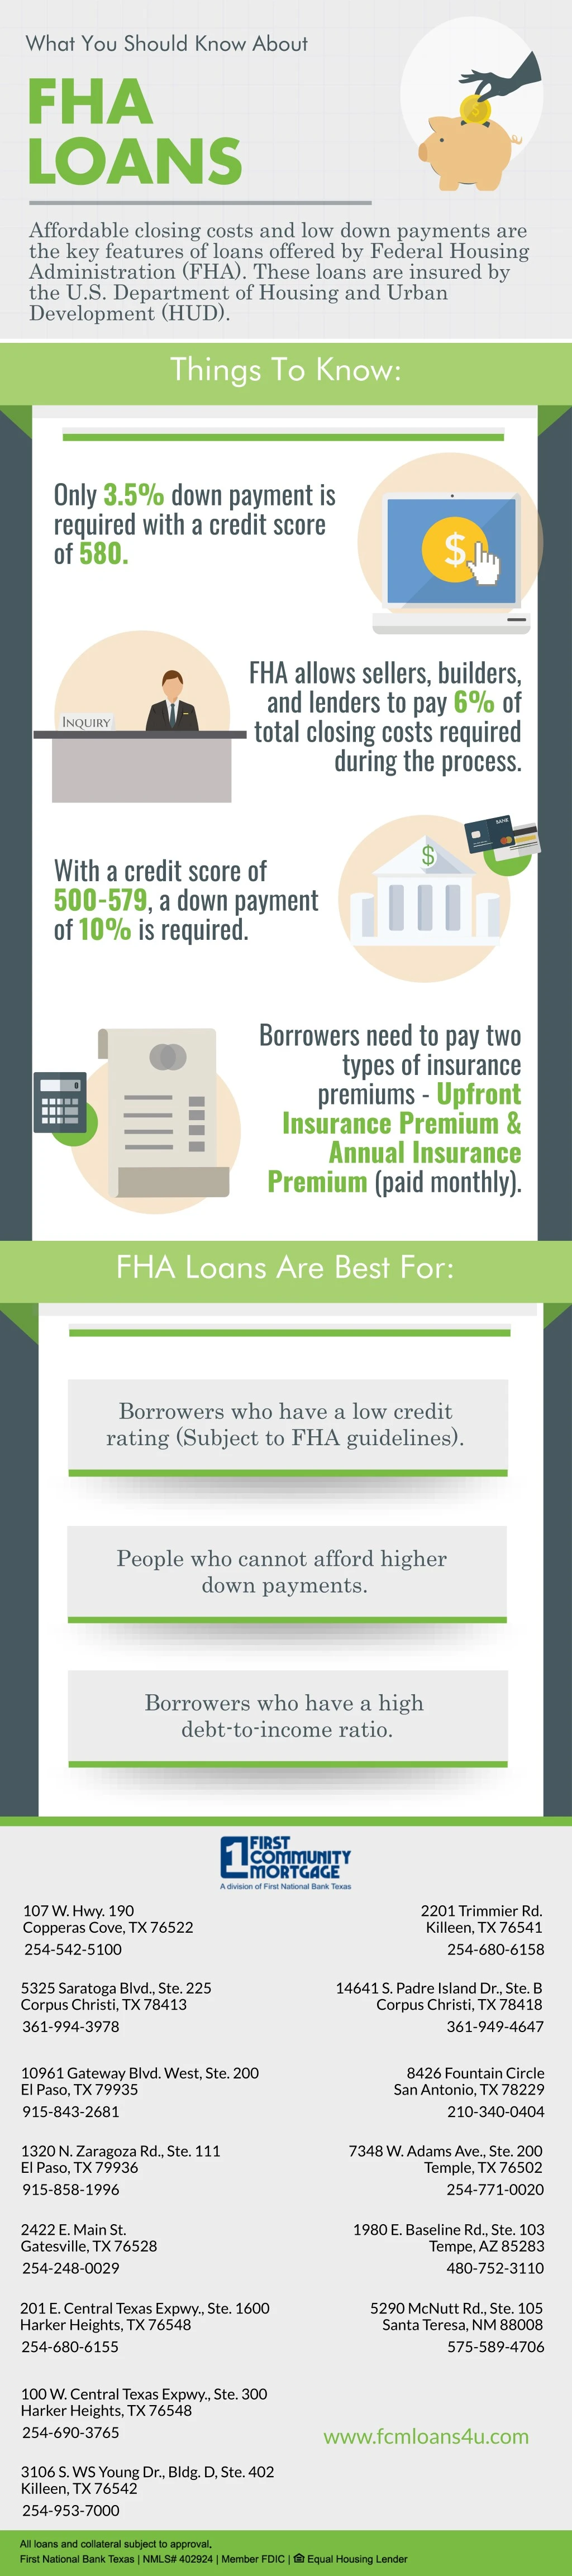 what you should know about fha loans